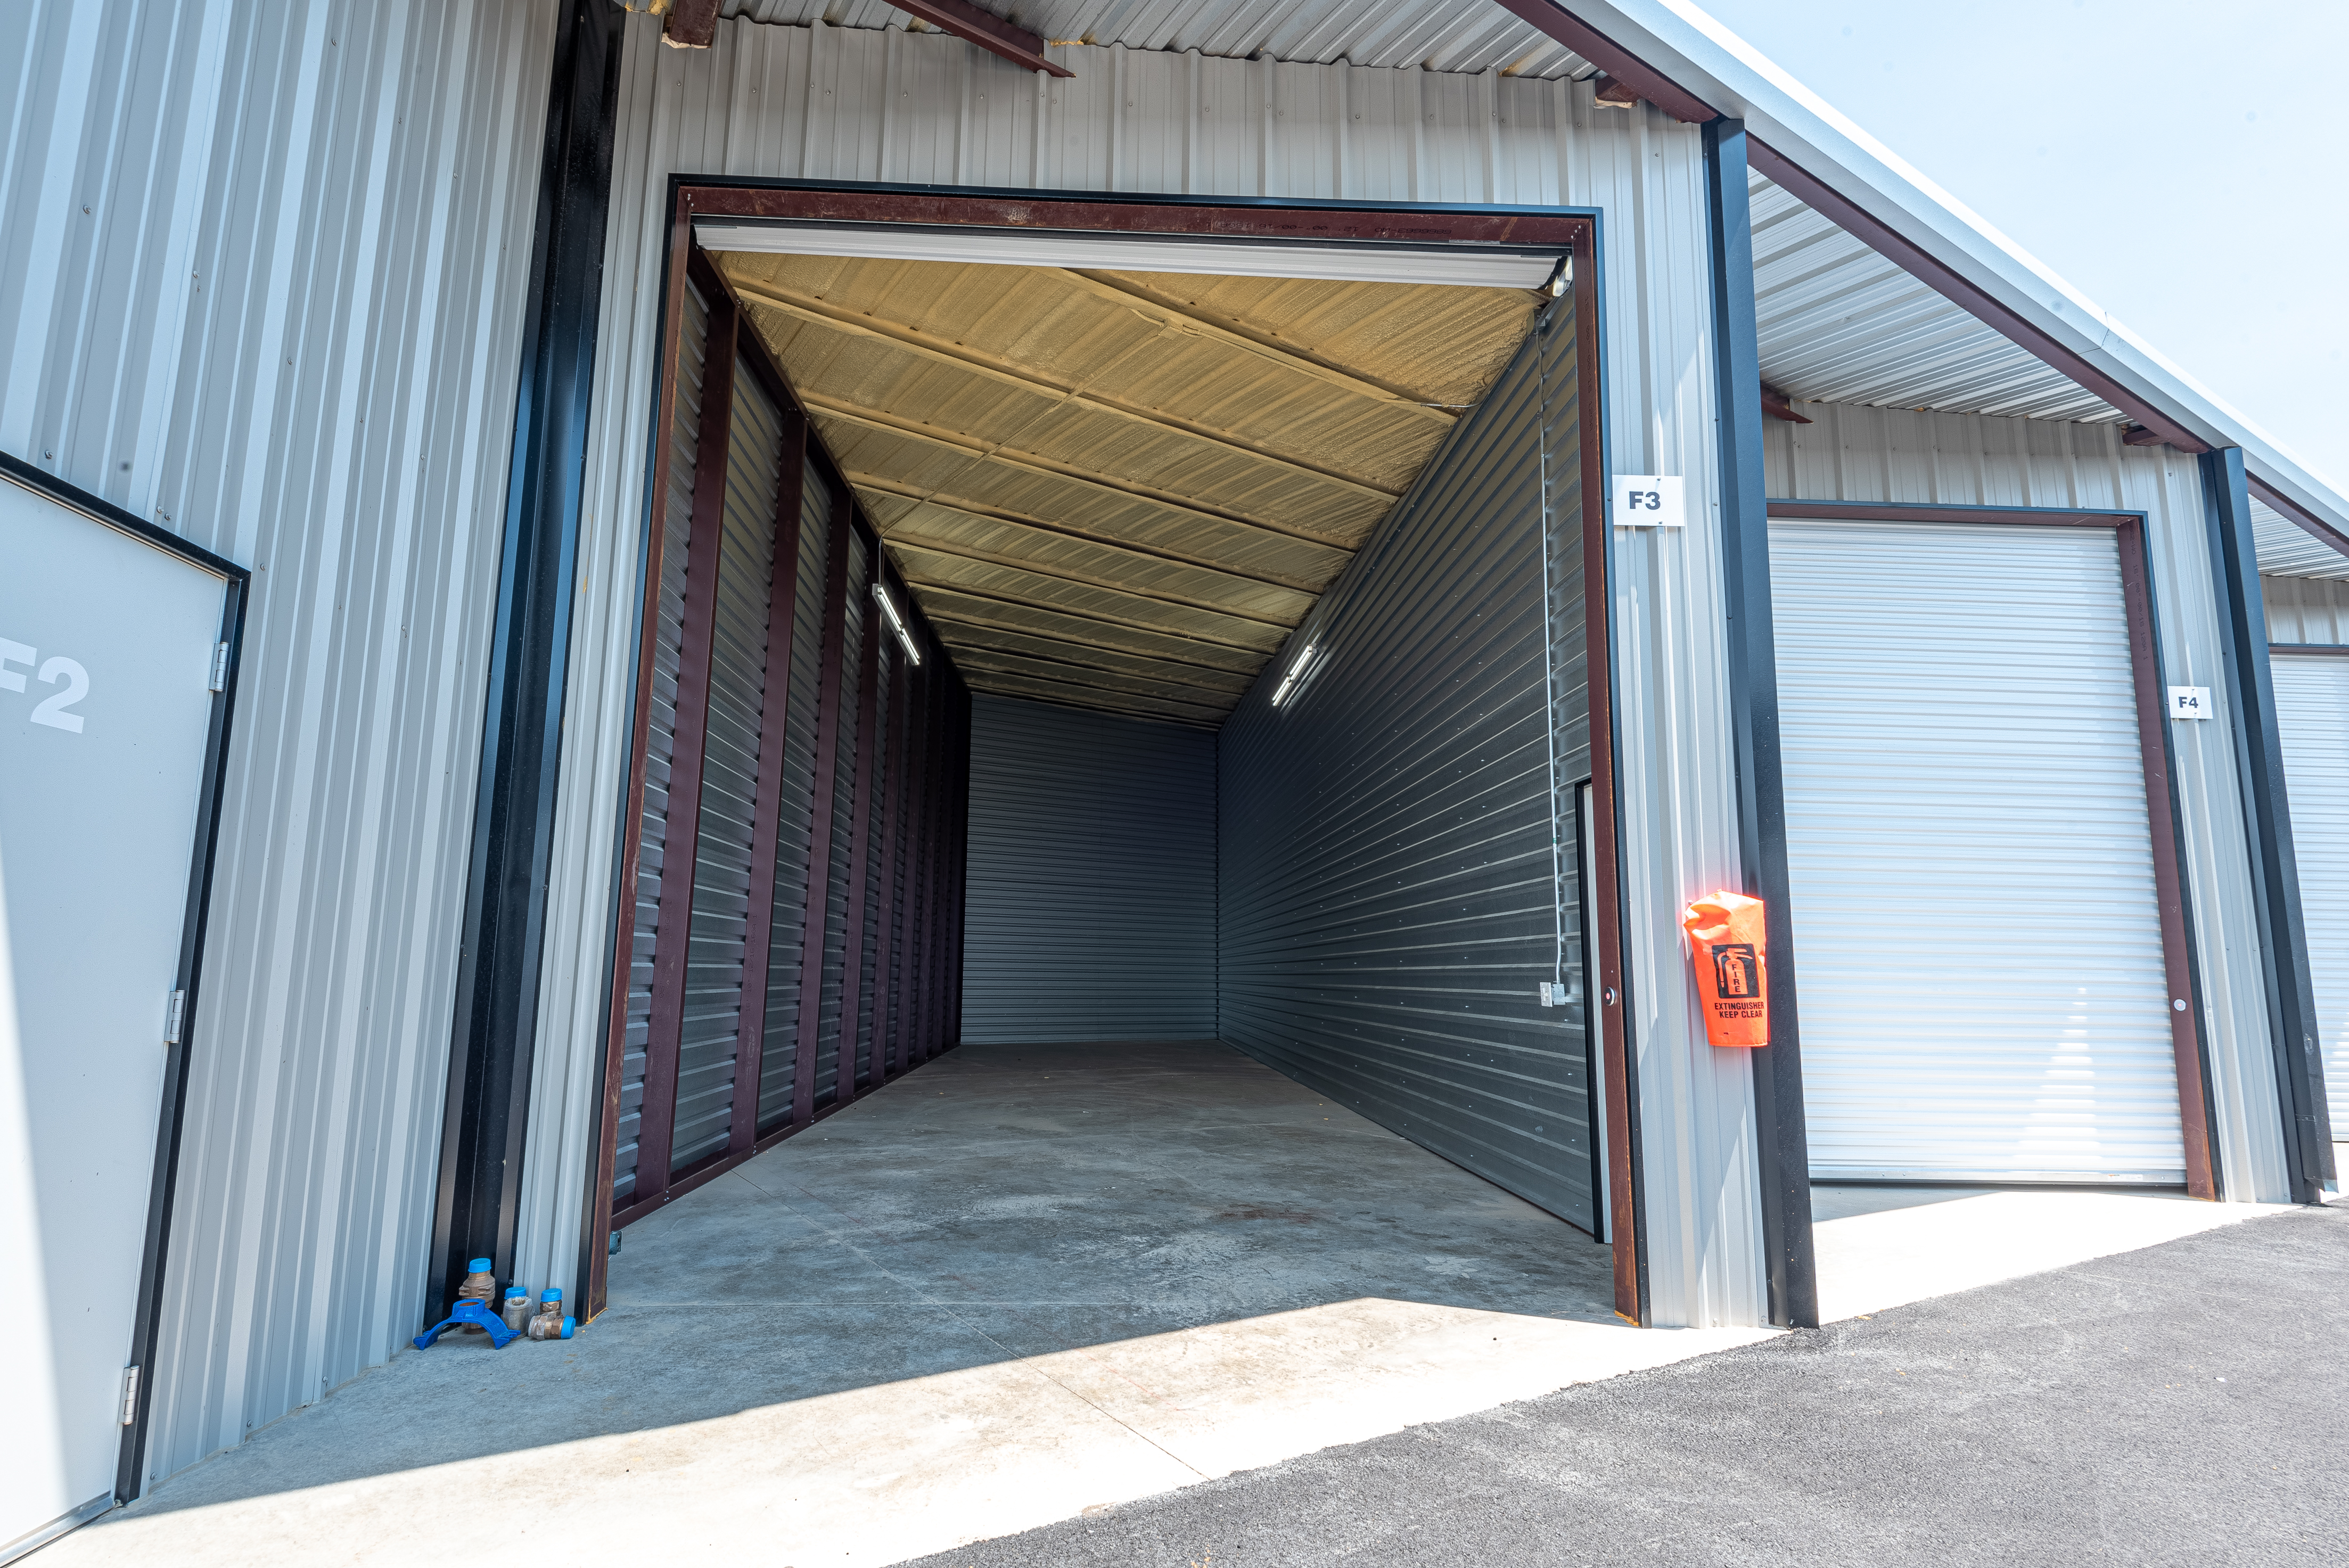 Haley Boat & RV Storage offers Enclosed parking units with extra high ceilings and automated doors